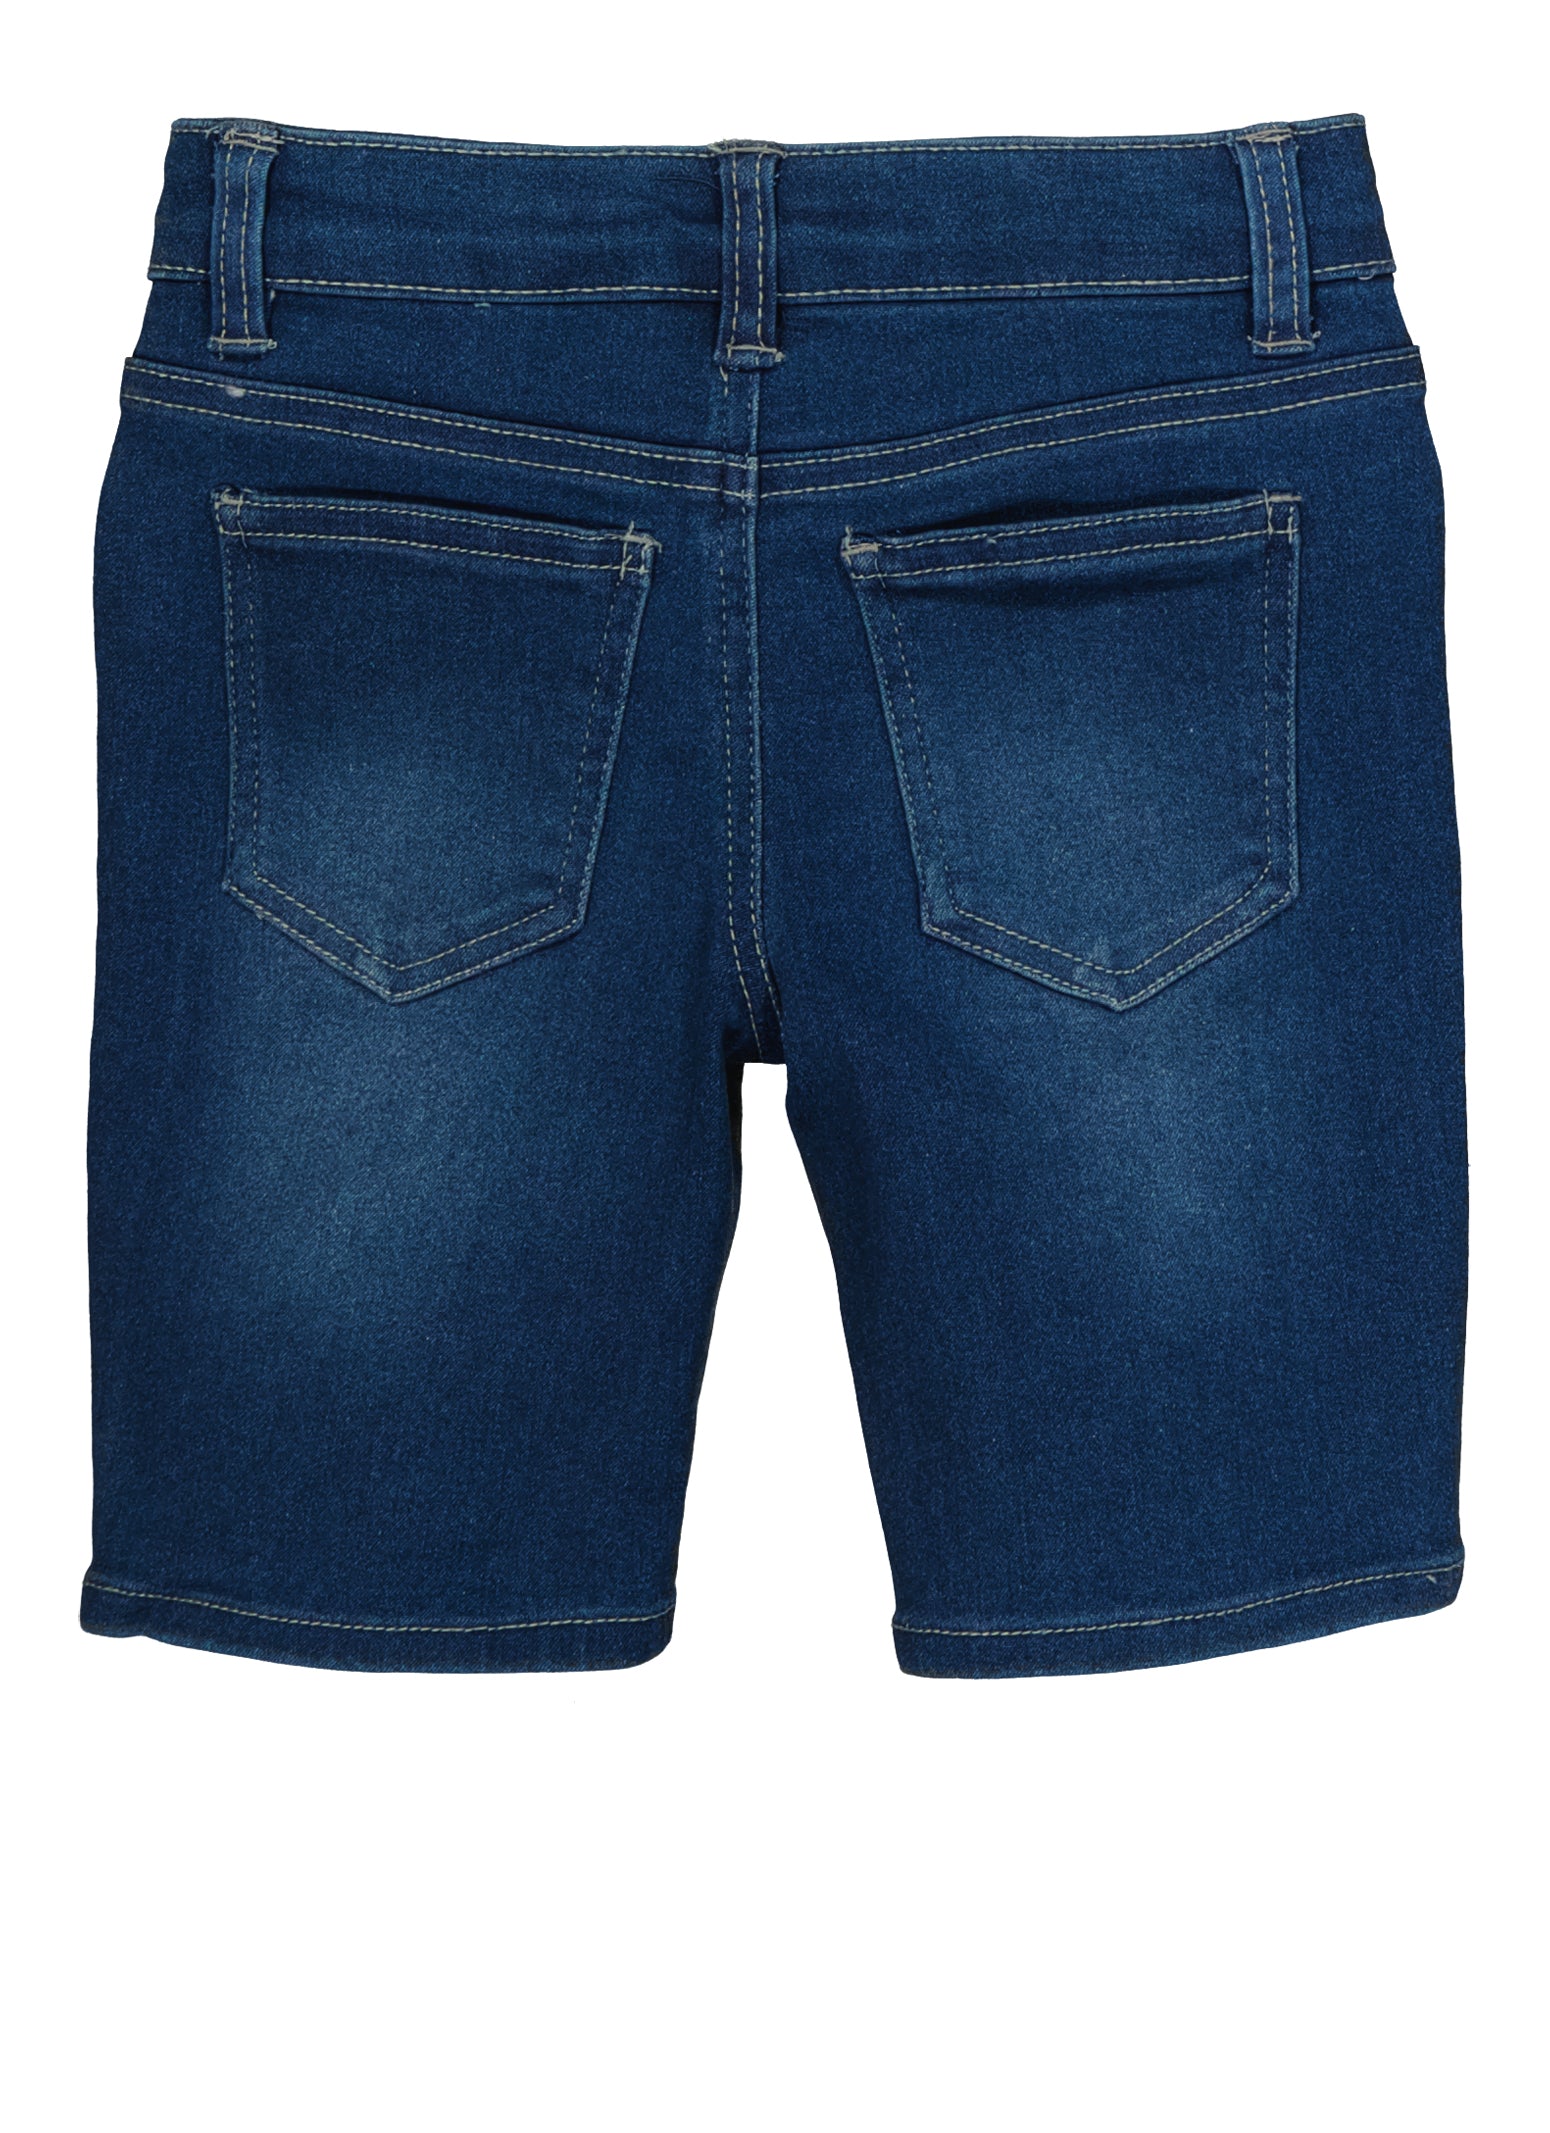 Jeans Women Summer Black Low Rise Jeans Shorts Beach Ladies Blue Ripped  Frayed Edge Lace Up Denim Shorts Female Booty Bikini From Wyiu, $17.91 |  DHgate.Com